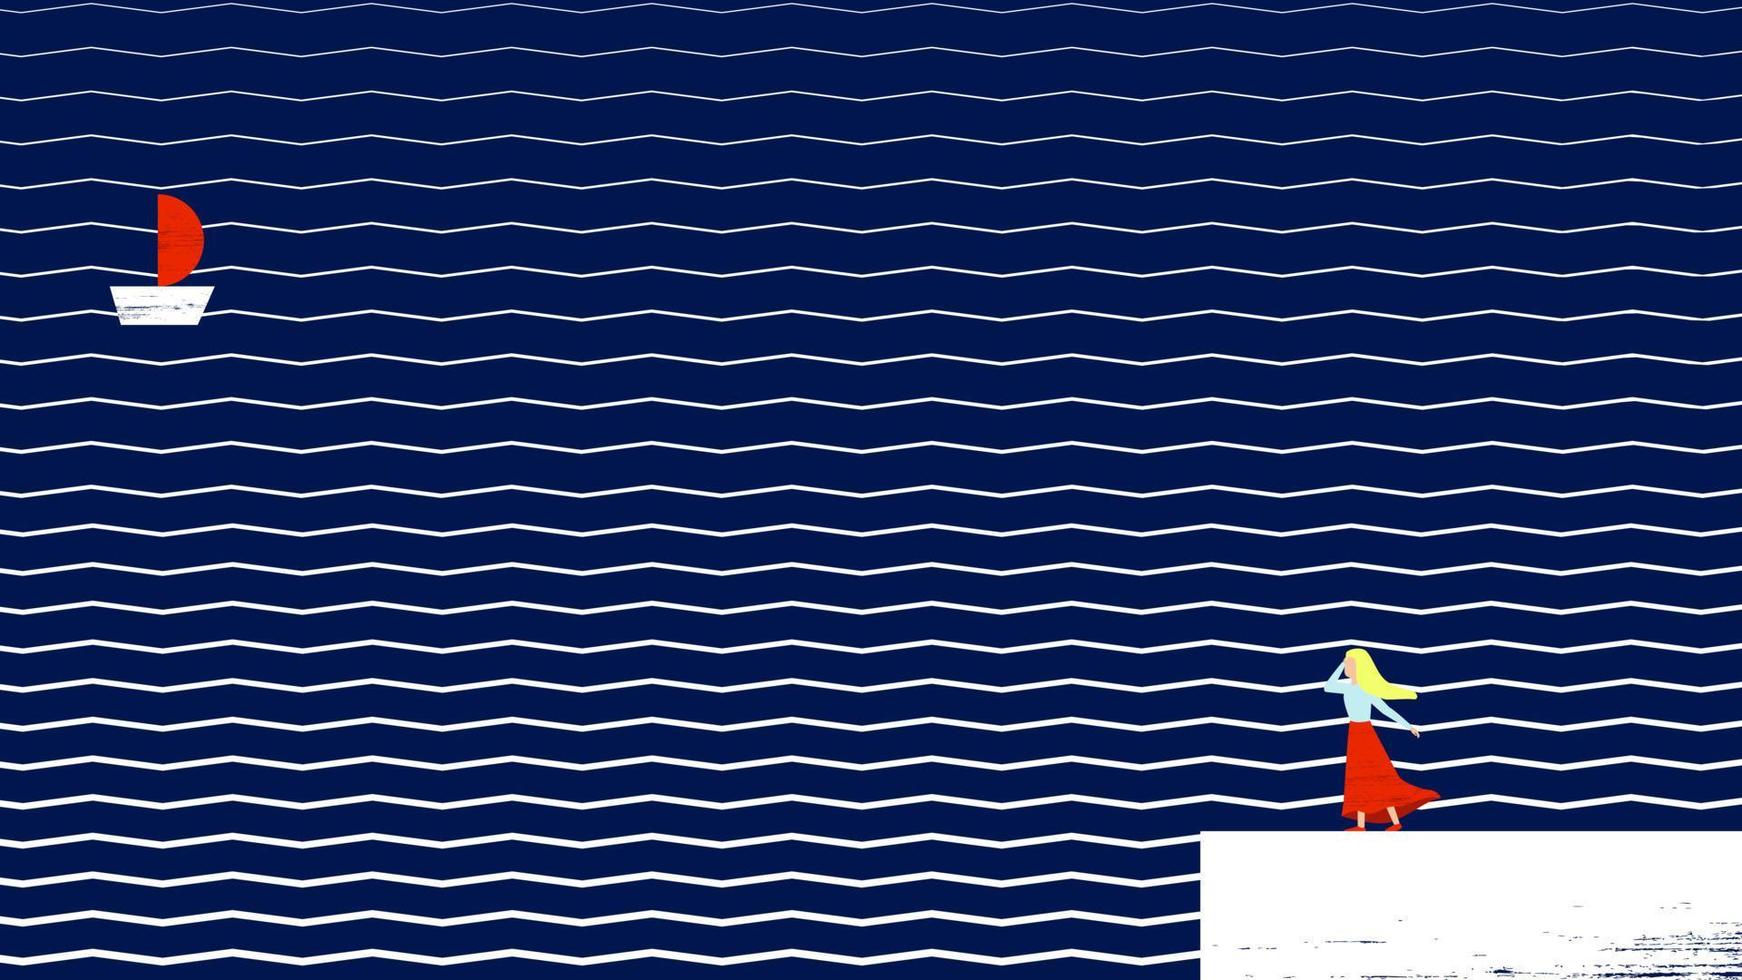 Vector illustration with abstract sea background. Assol girl stands on the shore and looks at the red sail on the ship. Abstract navy blue sea with zigzag pattern